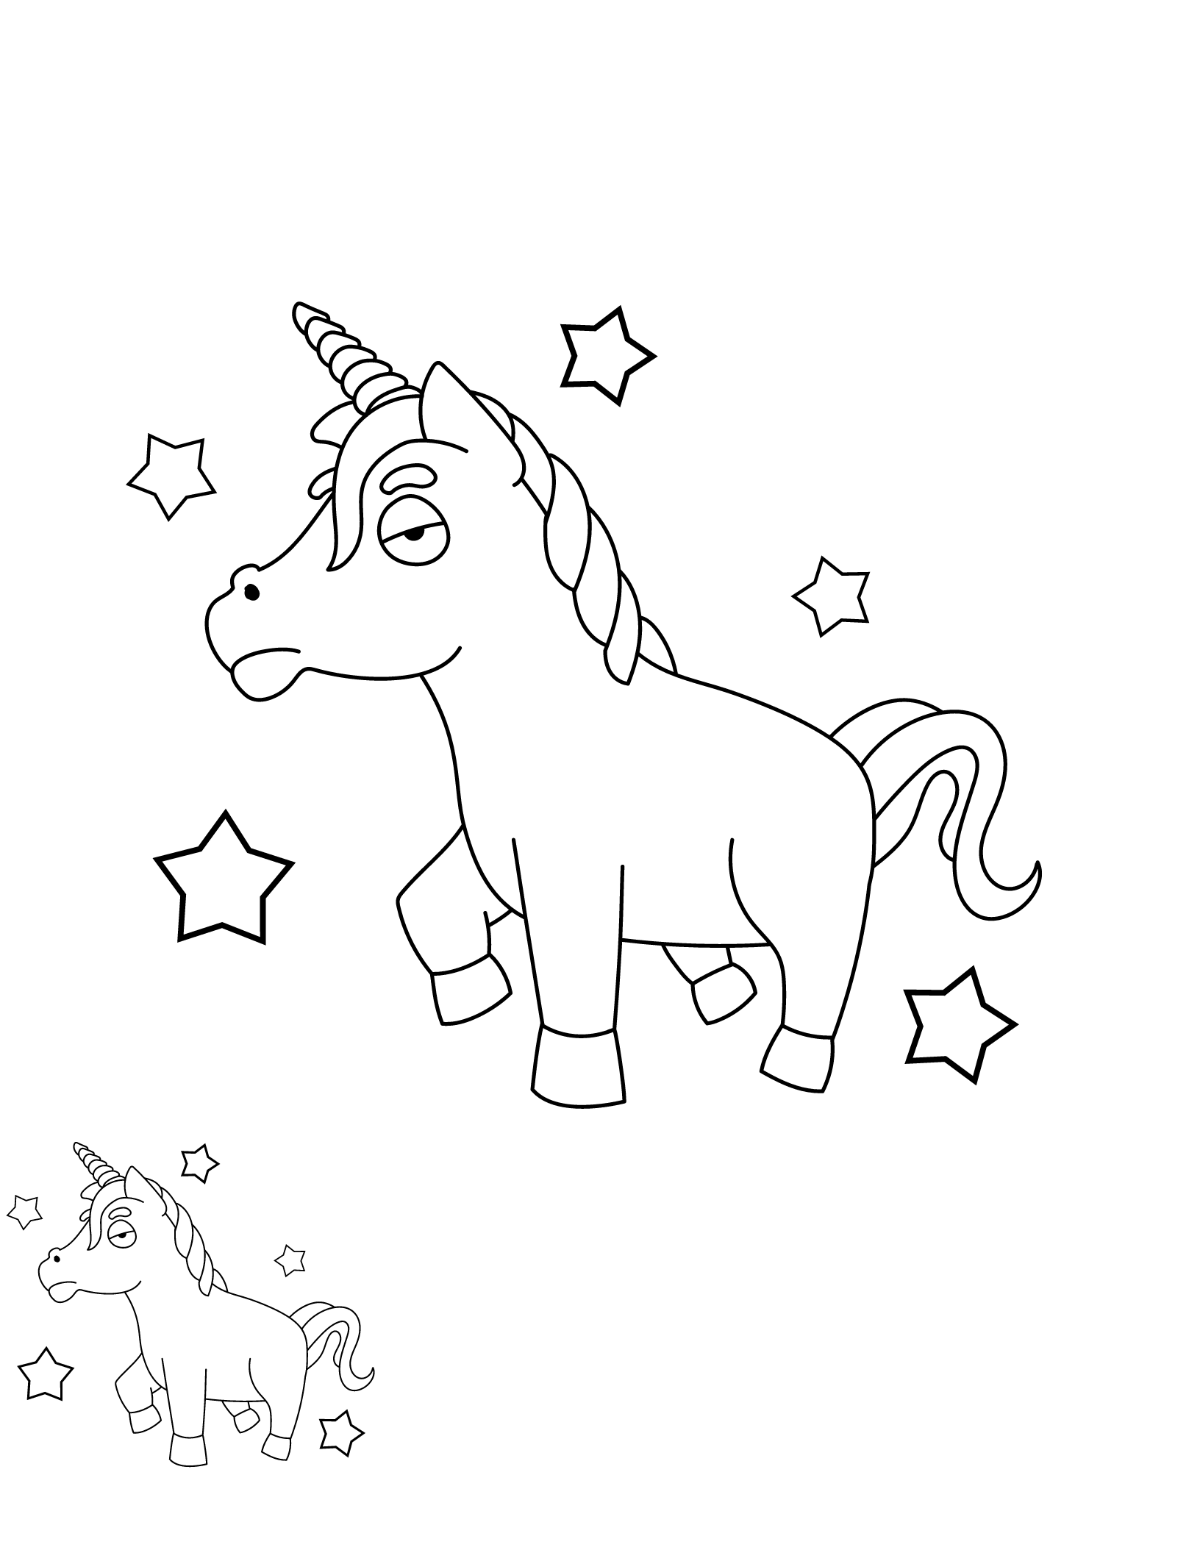 Funny Unicorn Coloring Page